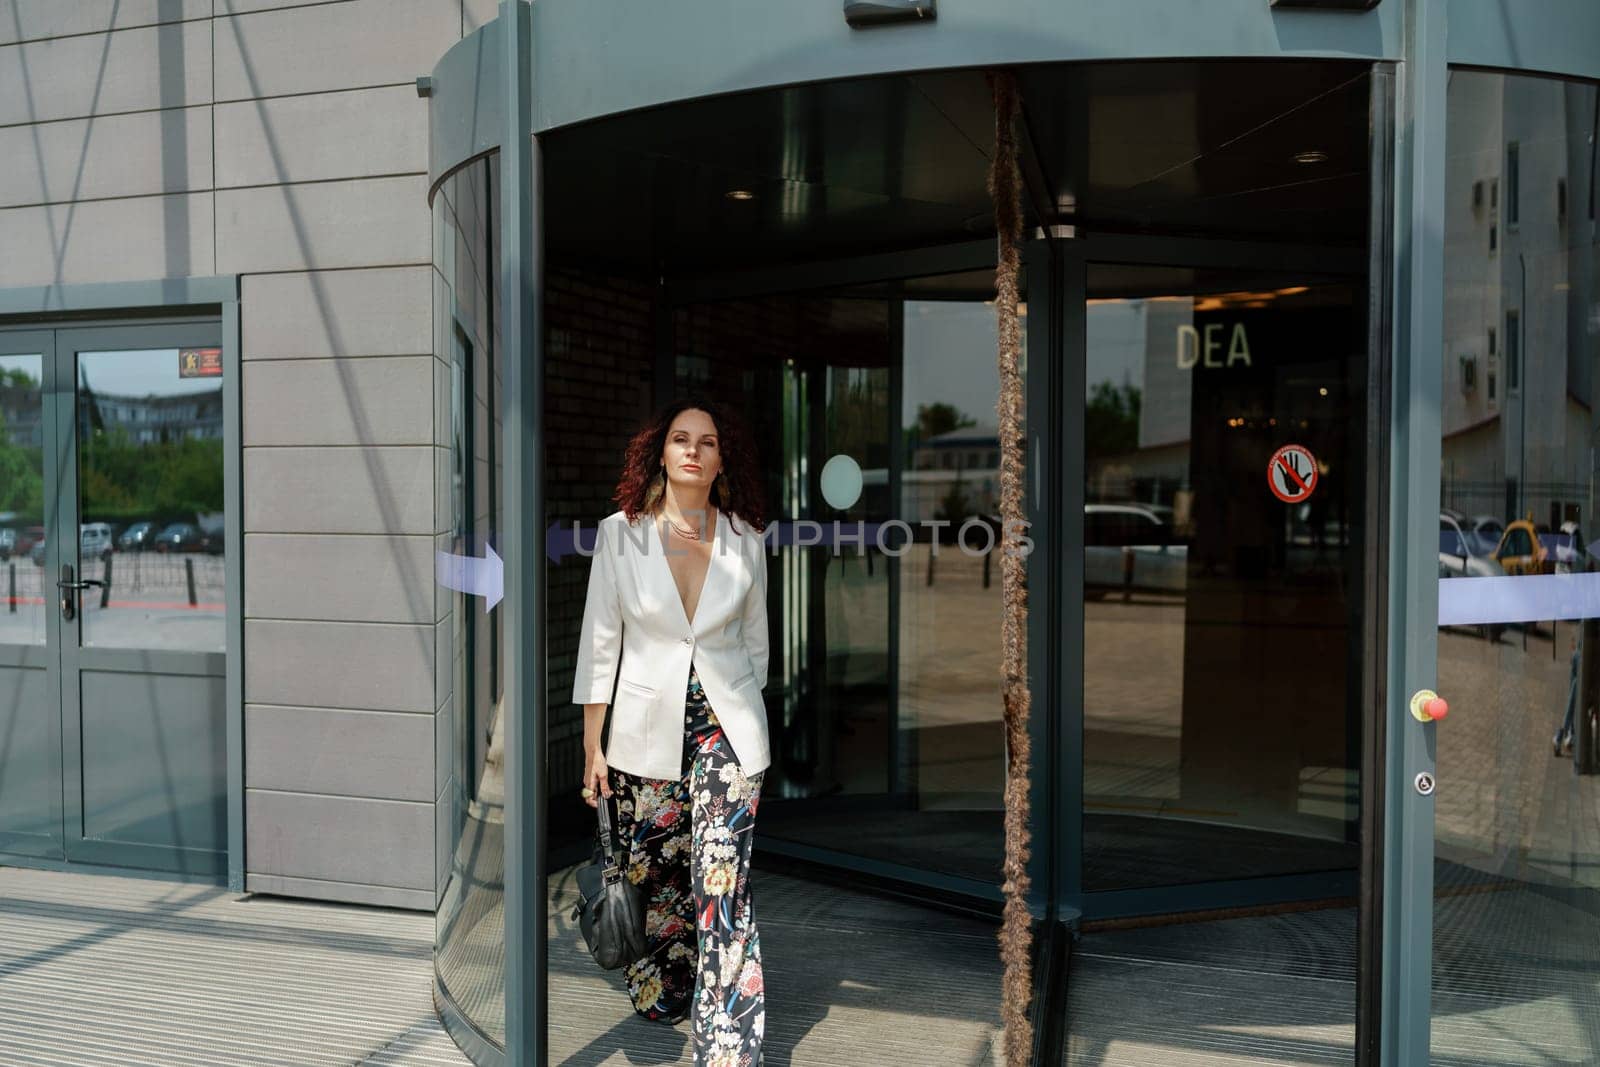 Woman leaves a supermarket. Caucasian model with long dark hair, wearing a white jacket and colored trousers